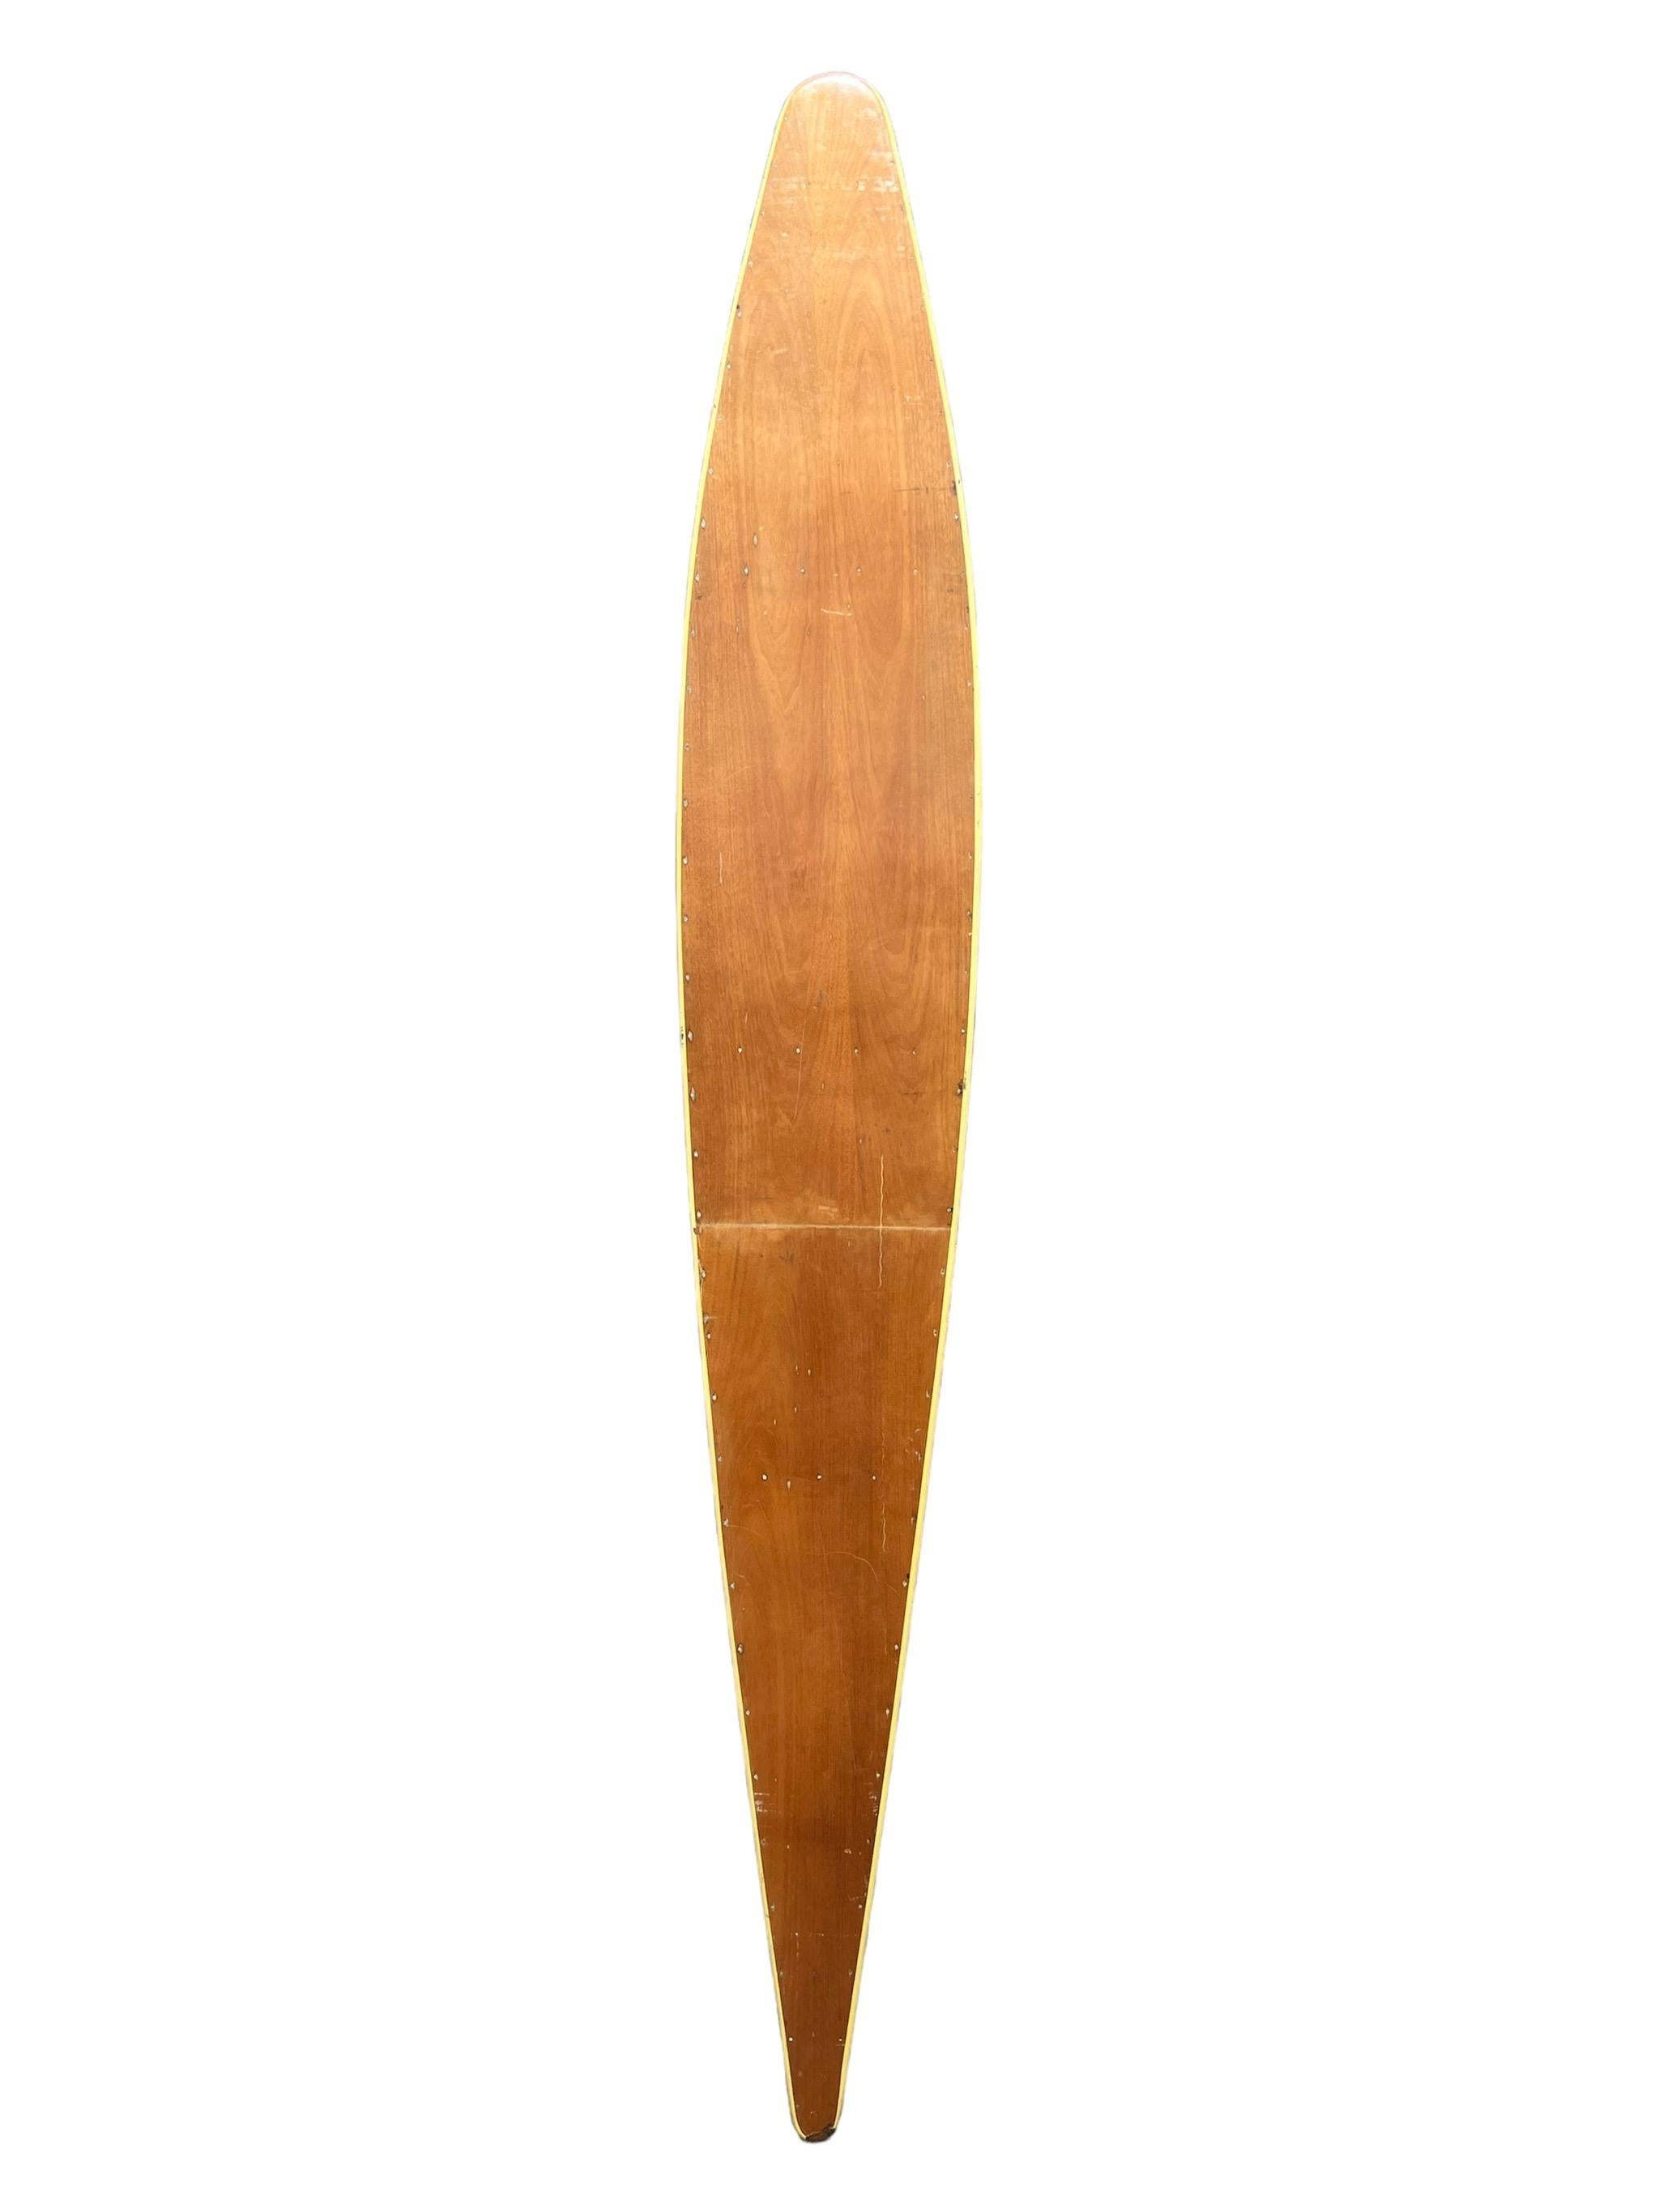 1930s Replica Tom Blake hollow wooden surfboard. Wooden panels joined by metallic fasteners with daffodil yellow outline. Patented by the late Tom Blake (1902-1994) in 1931. The interior ribbed design was modeled after the airplane wing, allowing